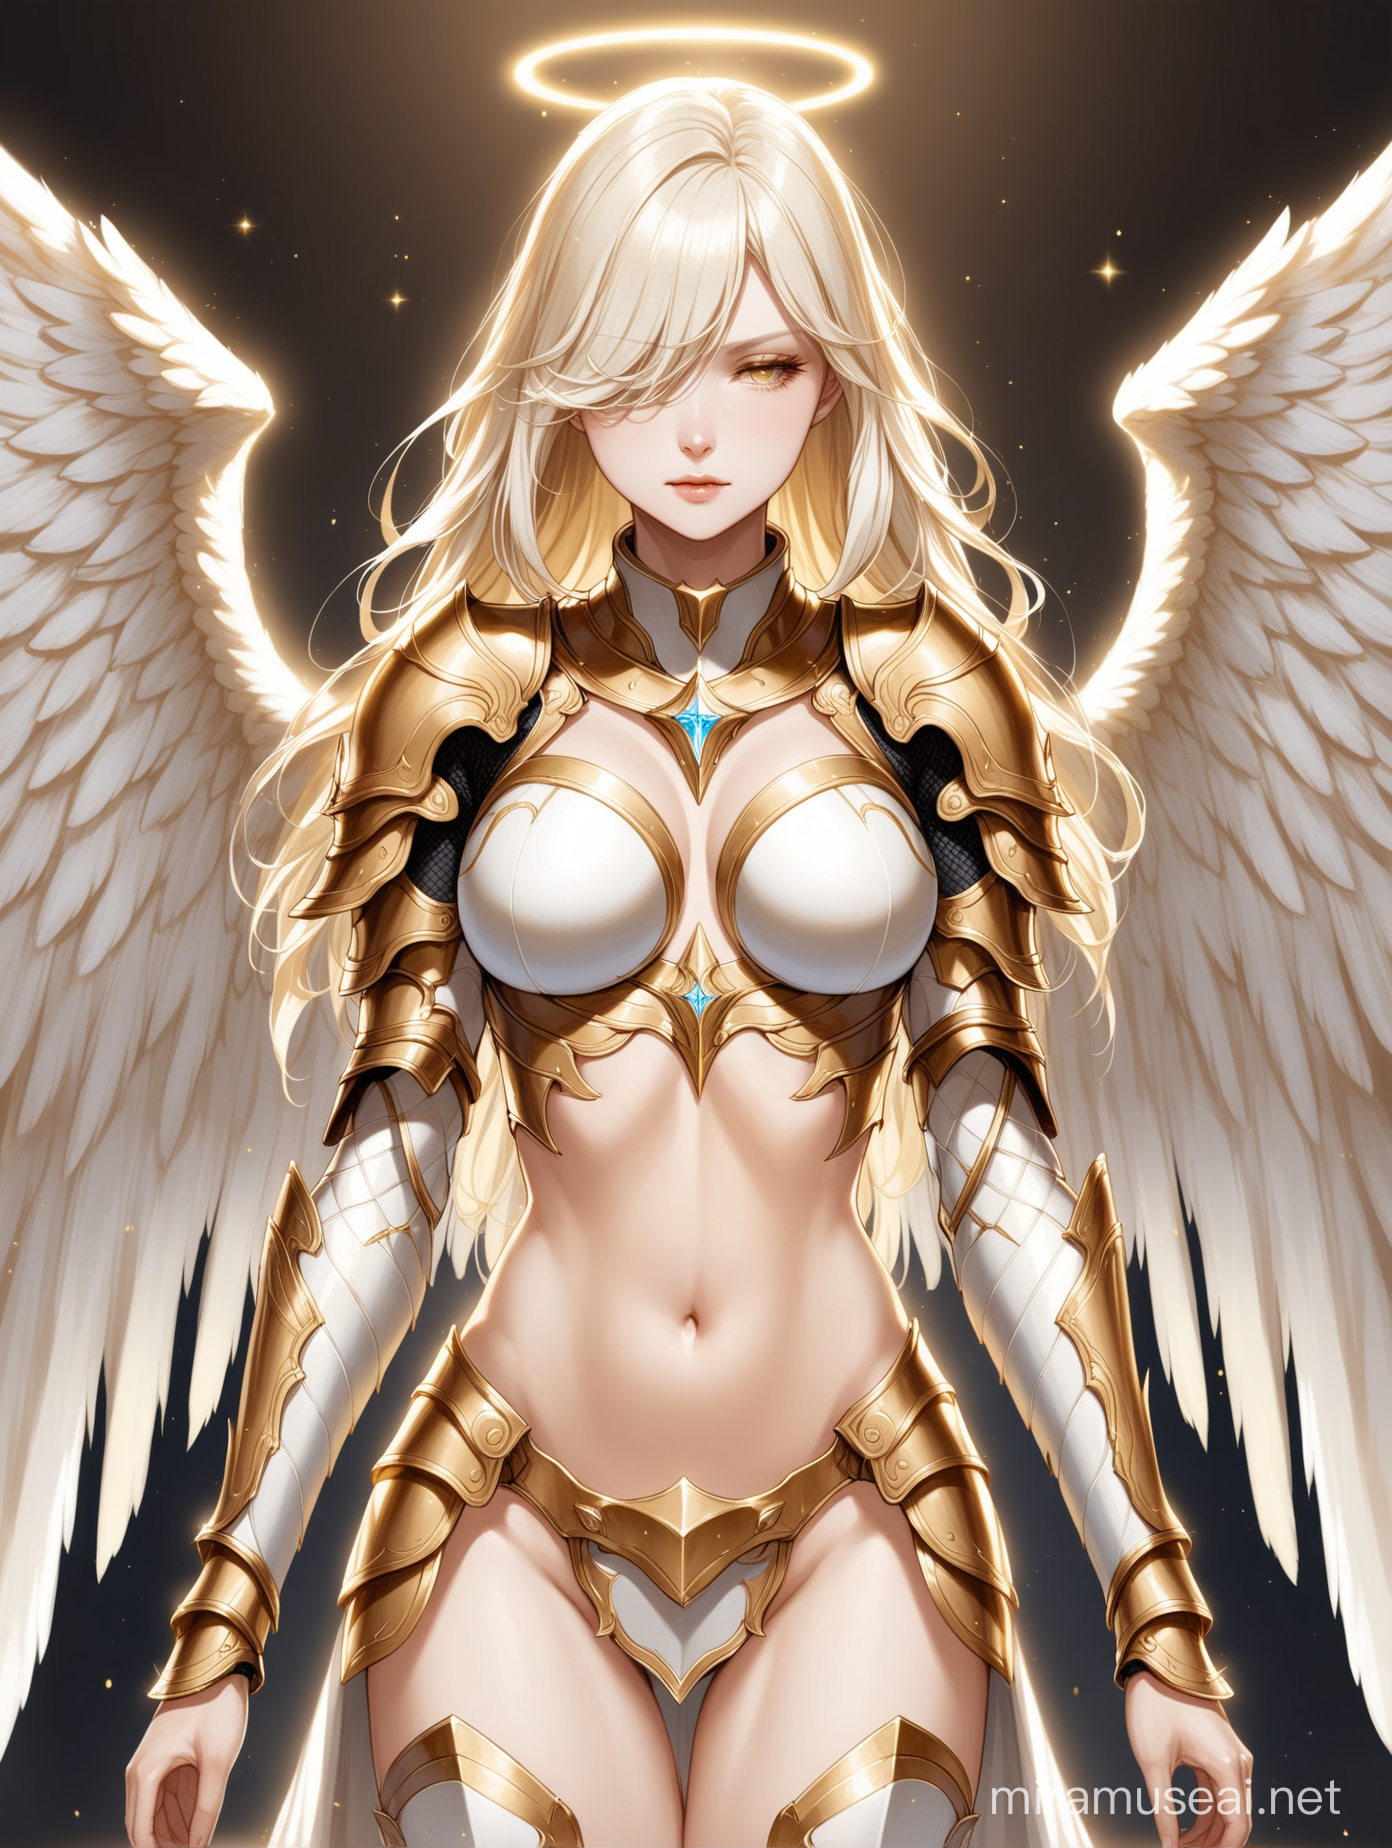 standing, cowboy shot,  a valkyrie angel type woman, with pale golden platin hair, hidden eye, beautiful feminine features, no bad anatomy, white and gold soft revealing armor